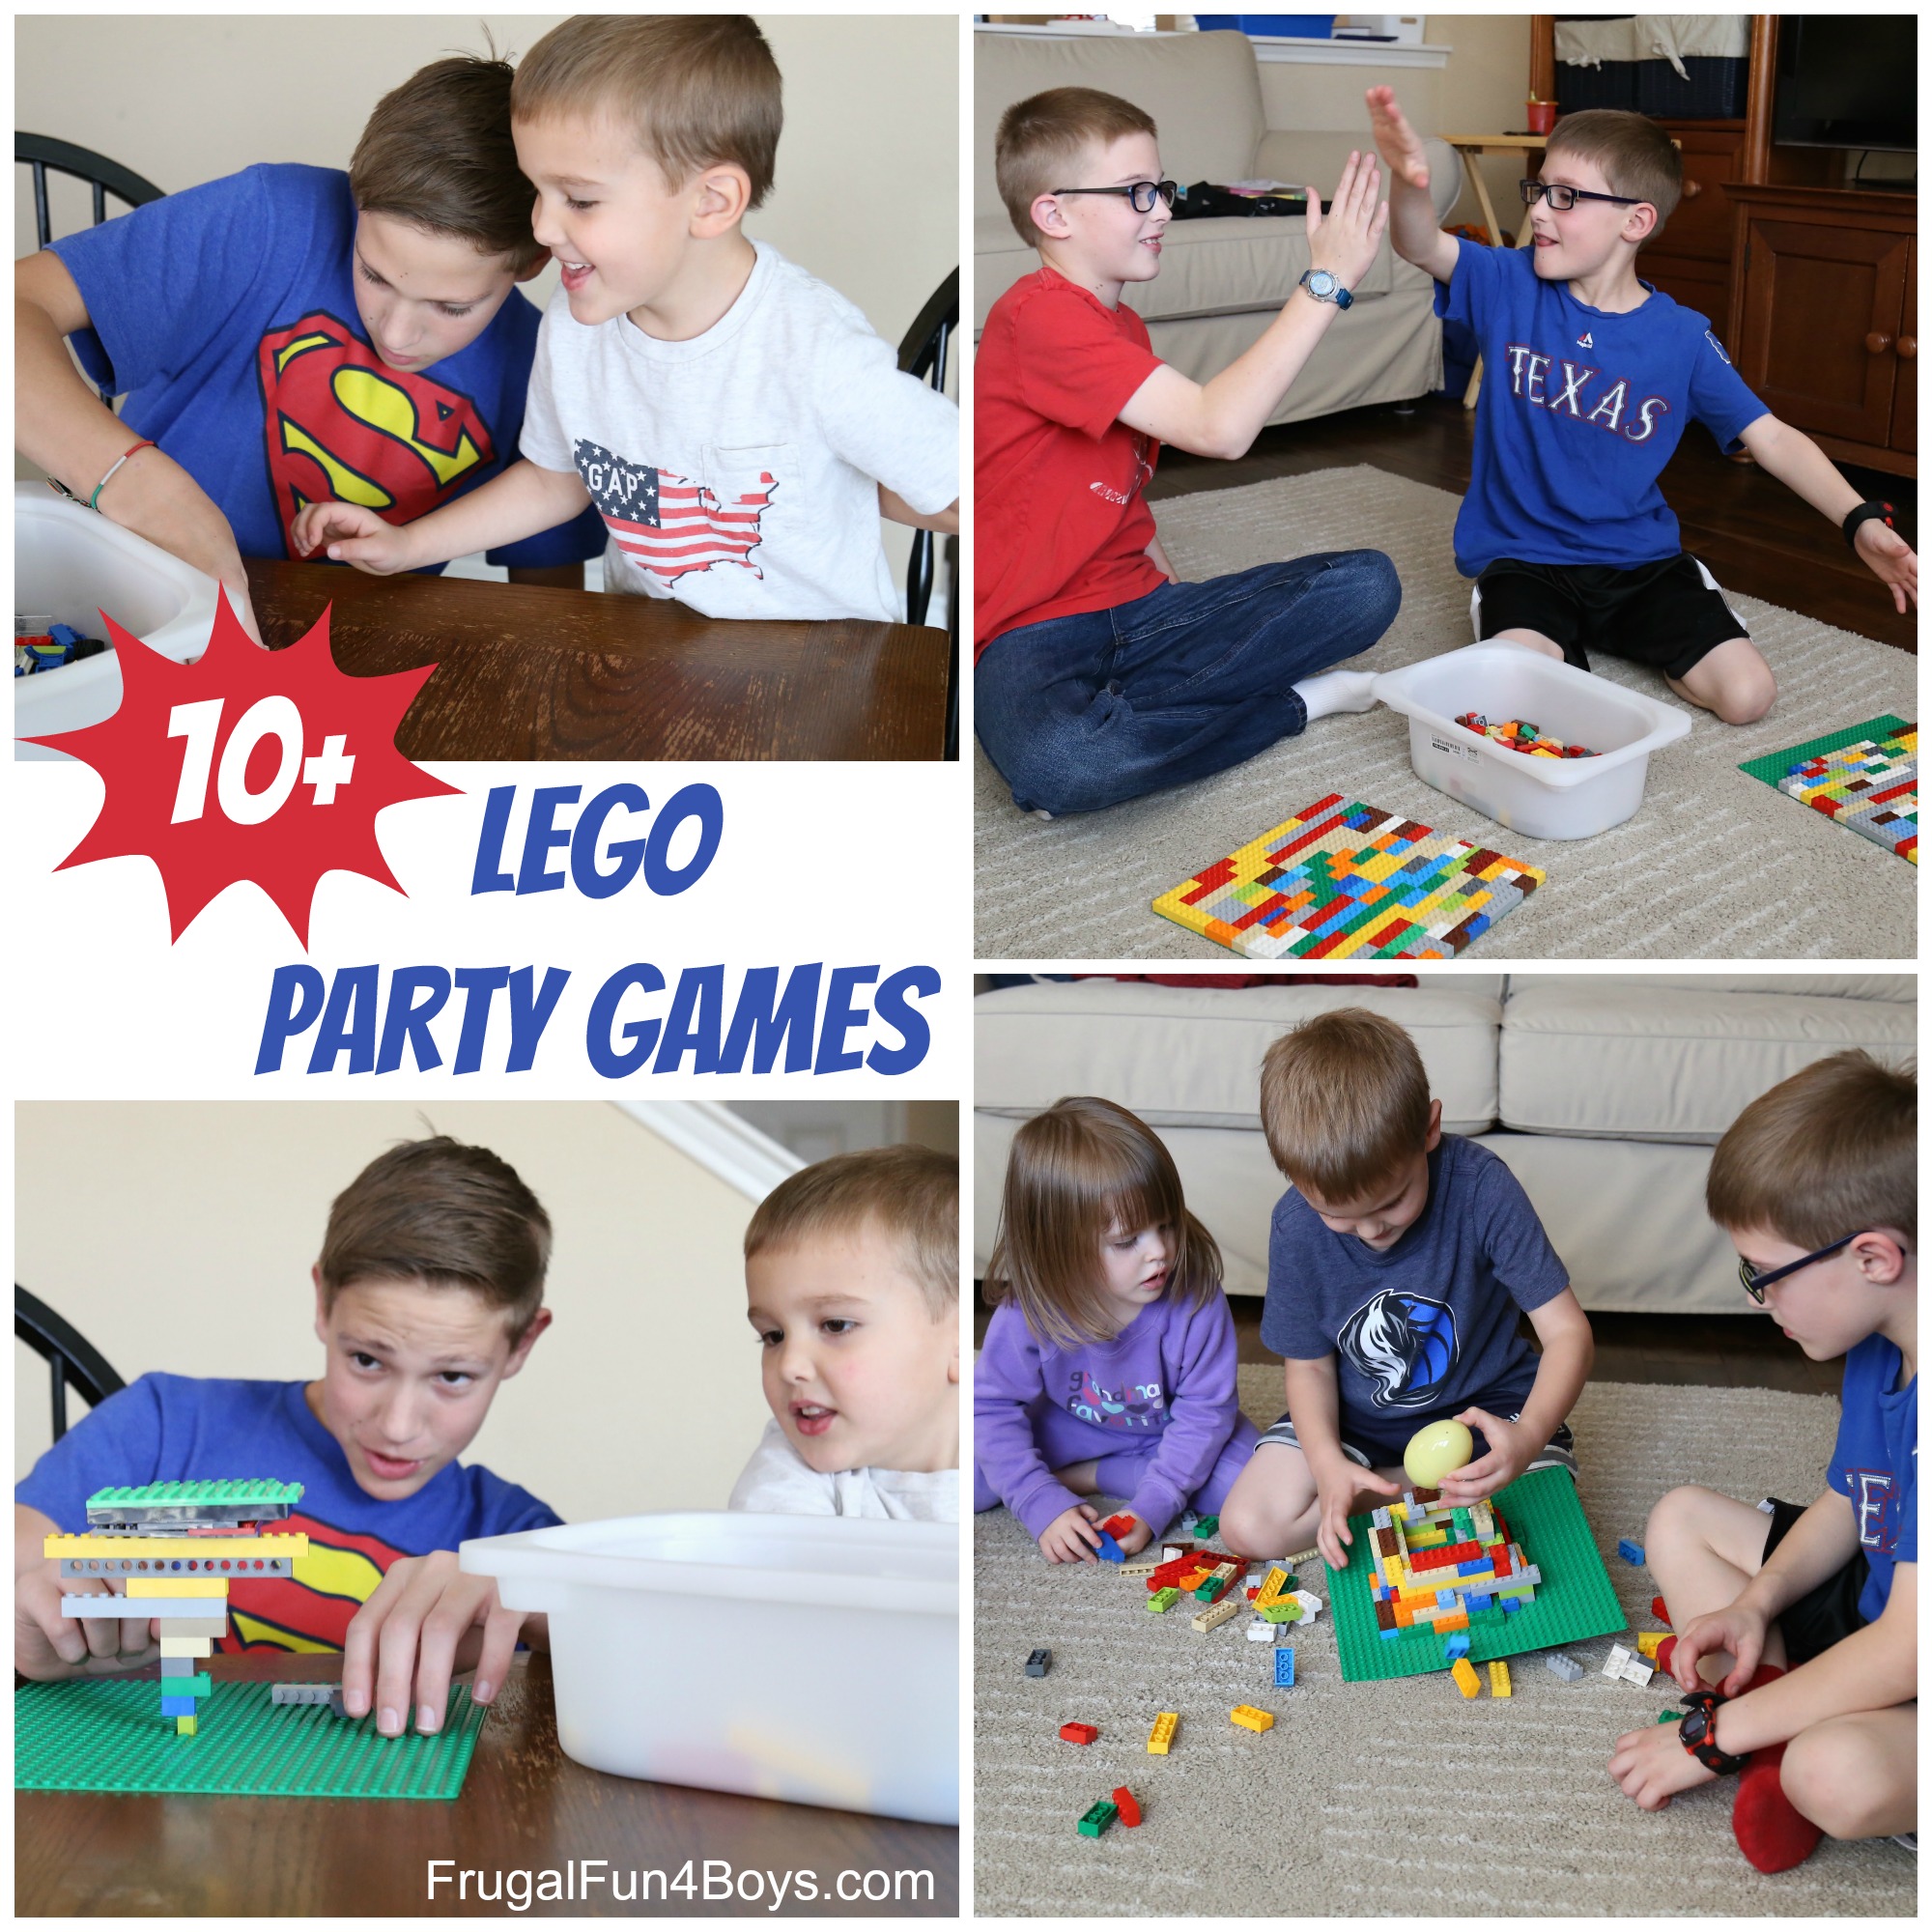 10 Totally Awesome Lego Party Games